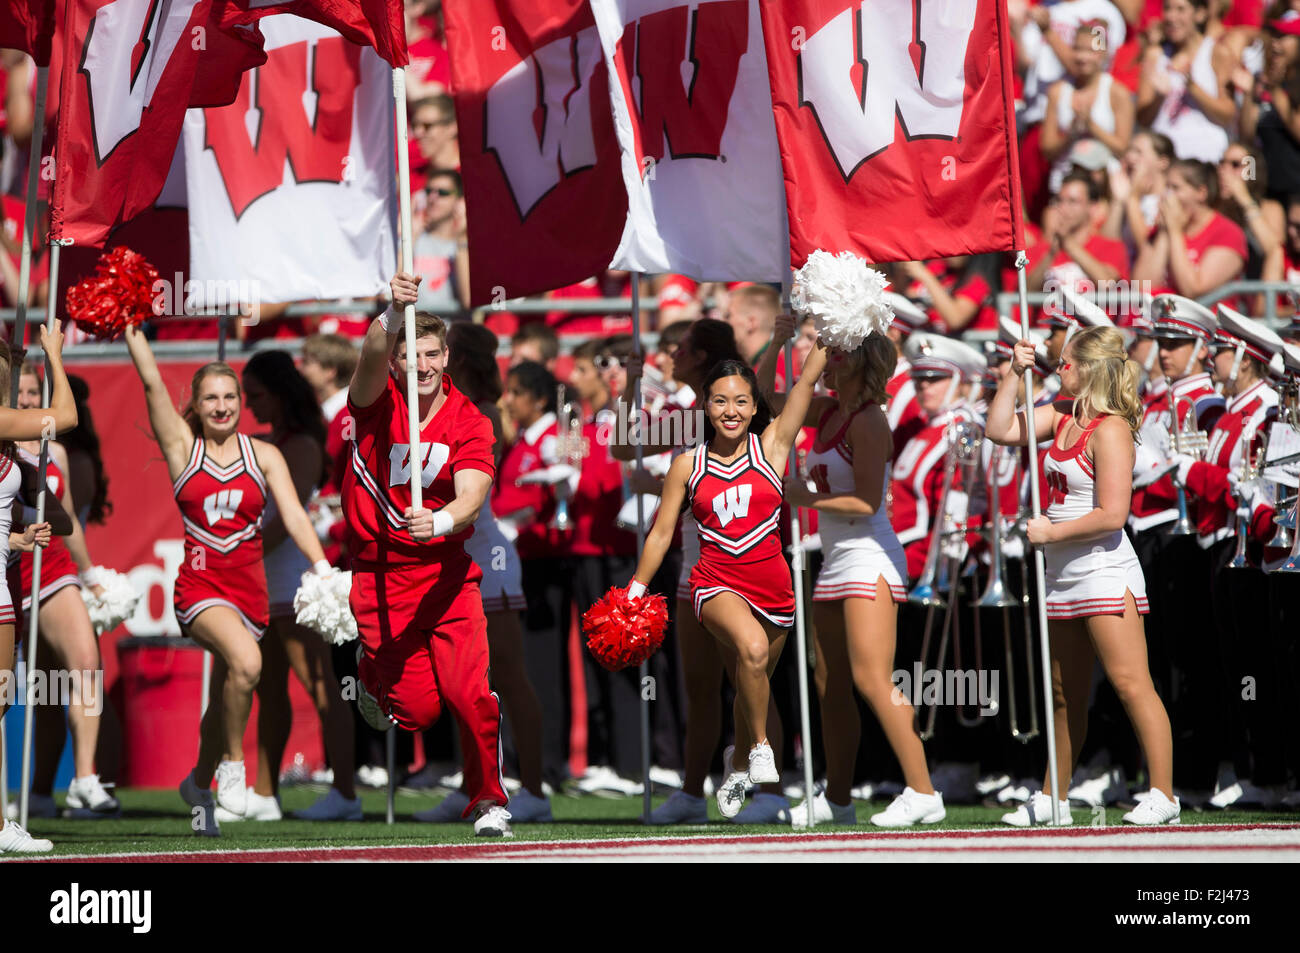 Madison, WI., USA. 19 September, 2015. Wisconsin cheerleader runs onto the field before the NCAA Football game between the Troy Trojans and the Wisconsin Badgers at Camp Randall Stadium in Madison, WI. Wisconsin defeated Troy 28-3. Credit:  Cal Sport Media/Alamy Live News Stock Photo